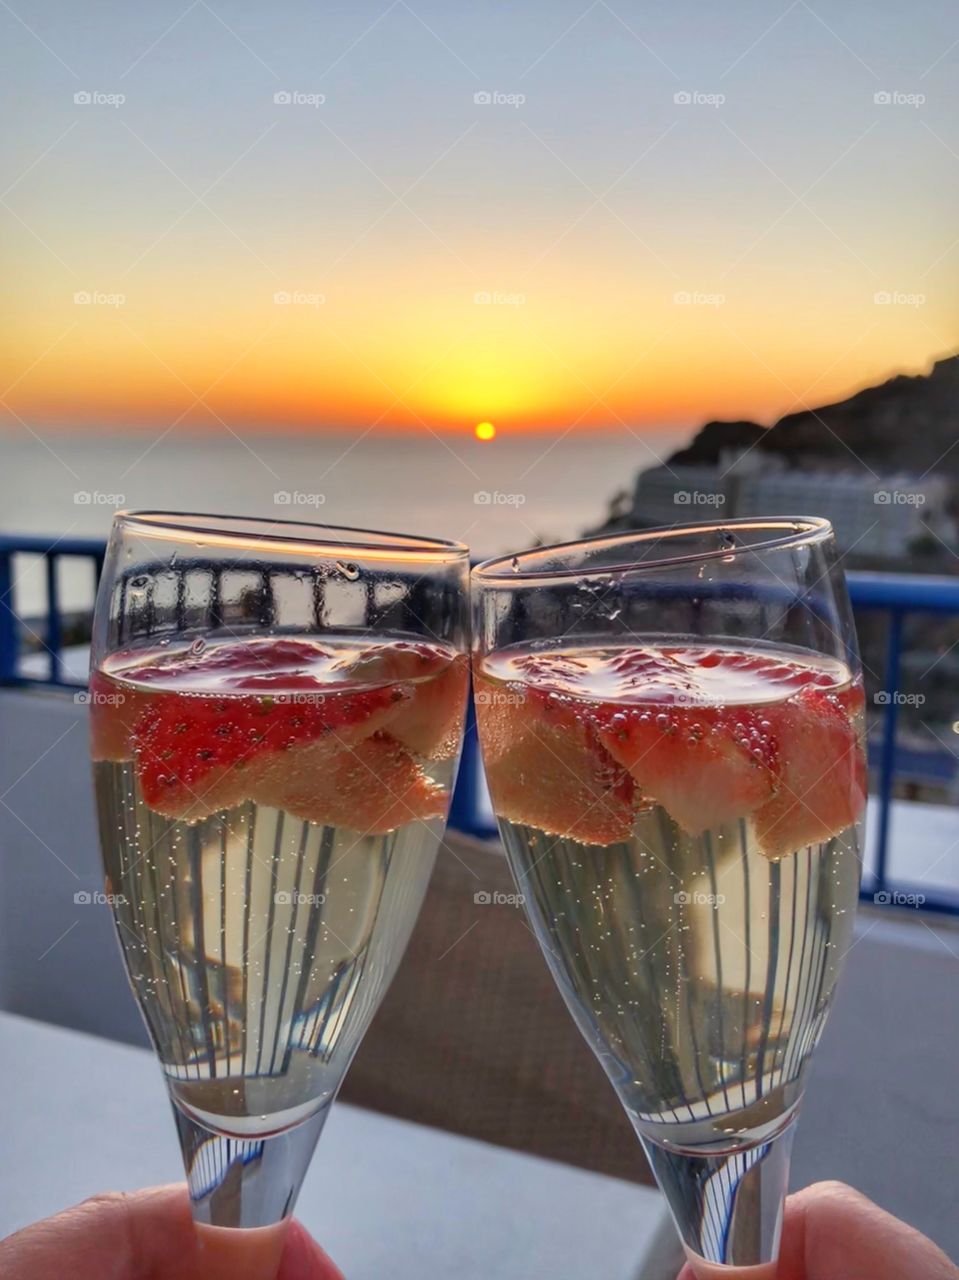 Fizz, strawberries, sunset & you ❤️